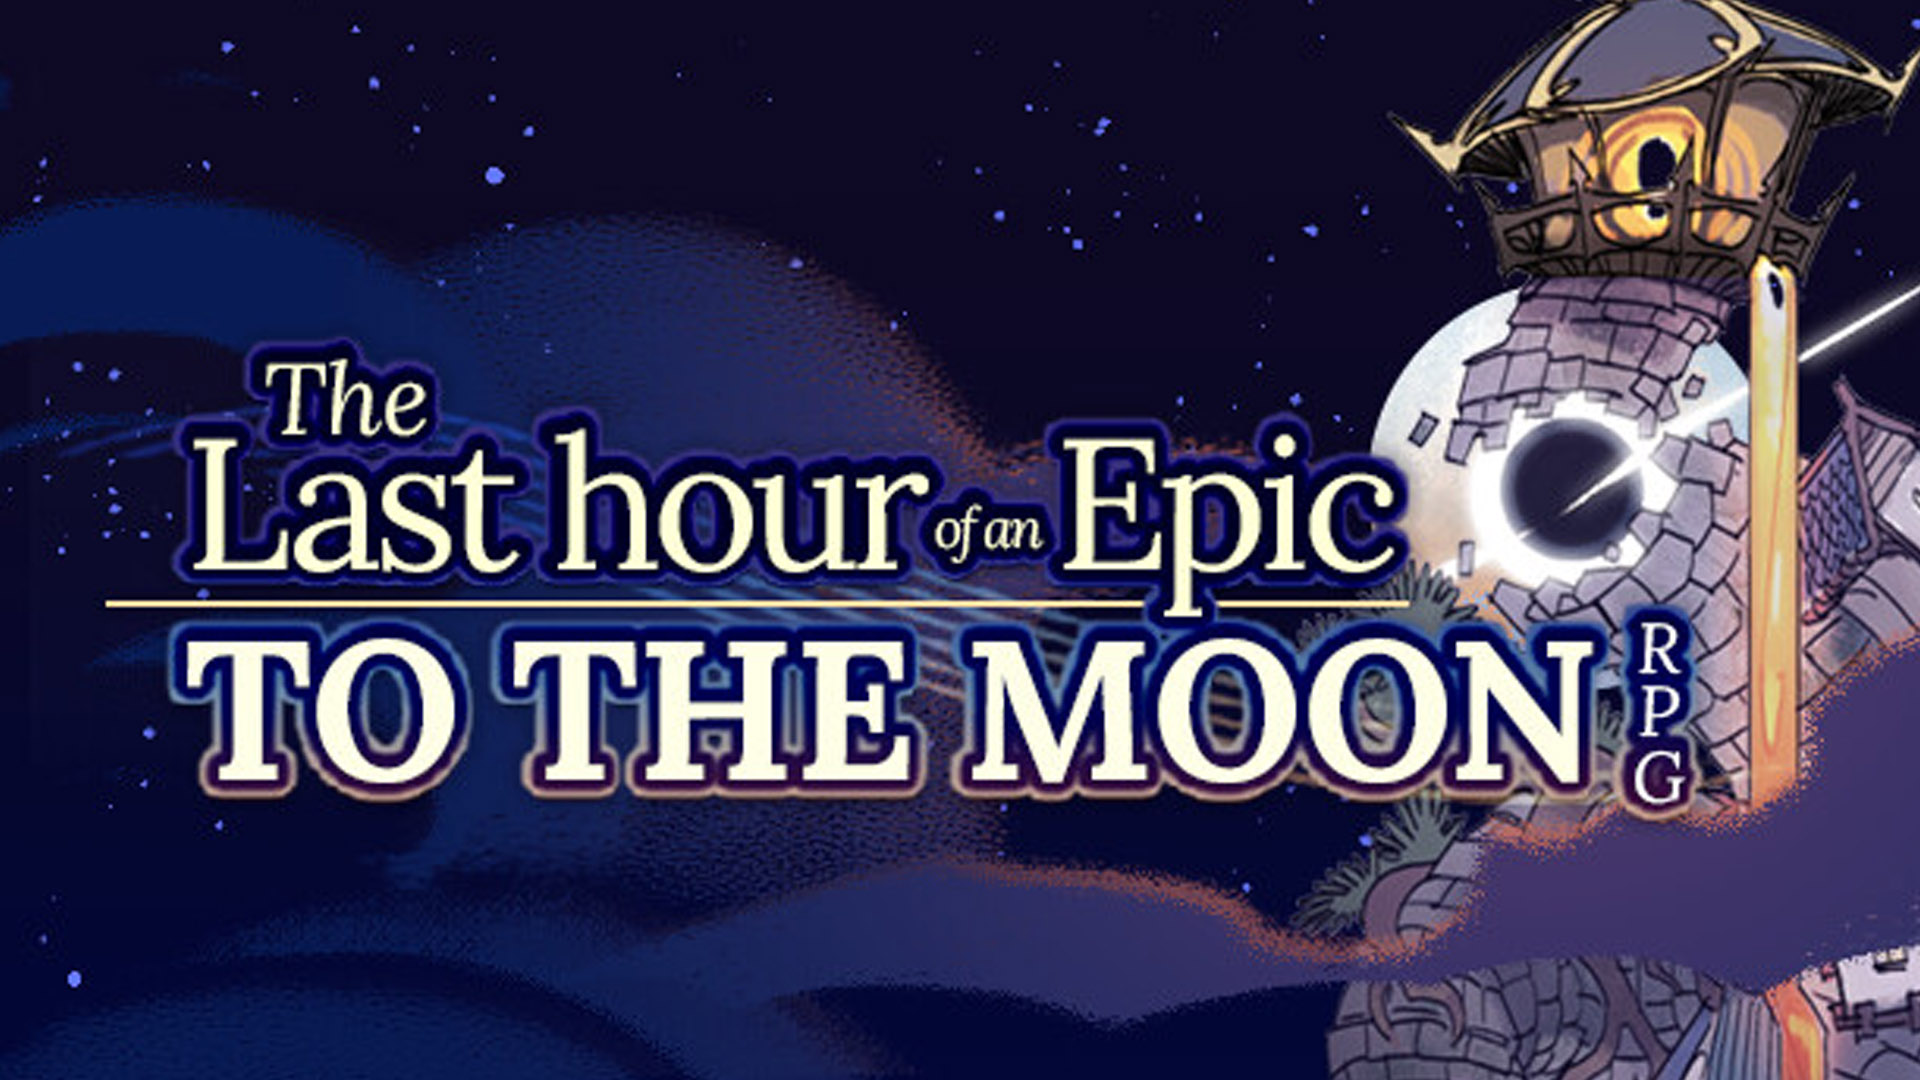 The Last Hour of an Epic To the Moon RPG Artwork 001